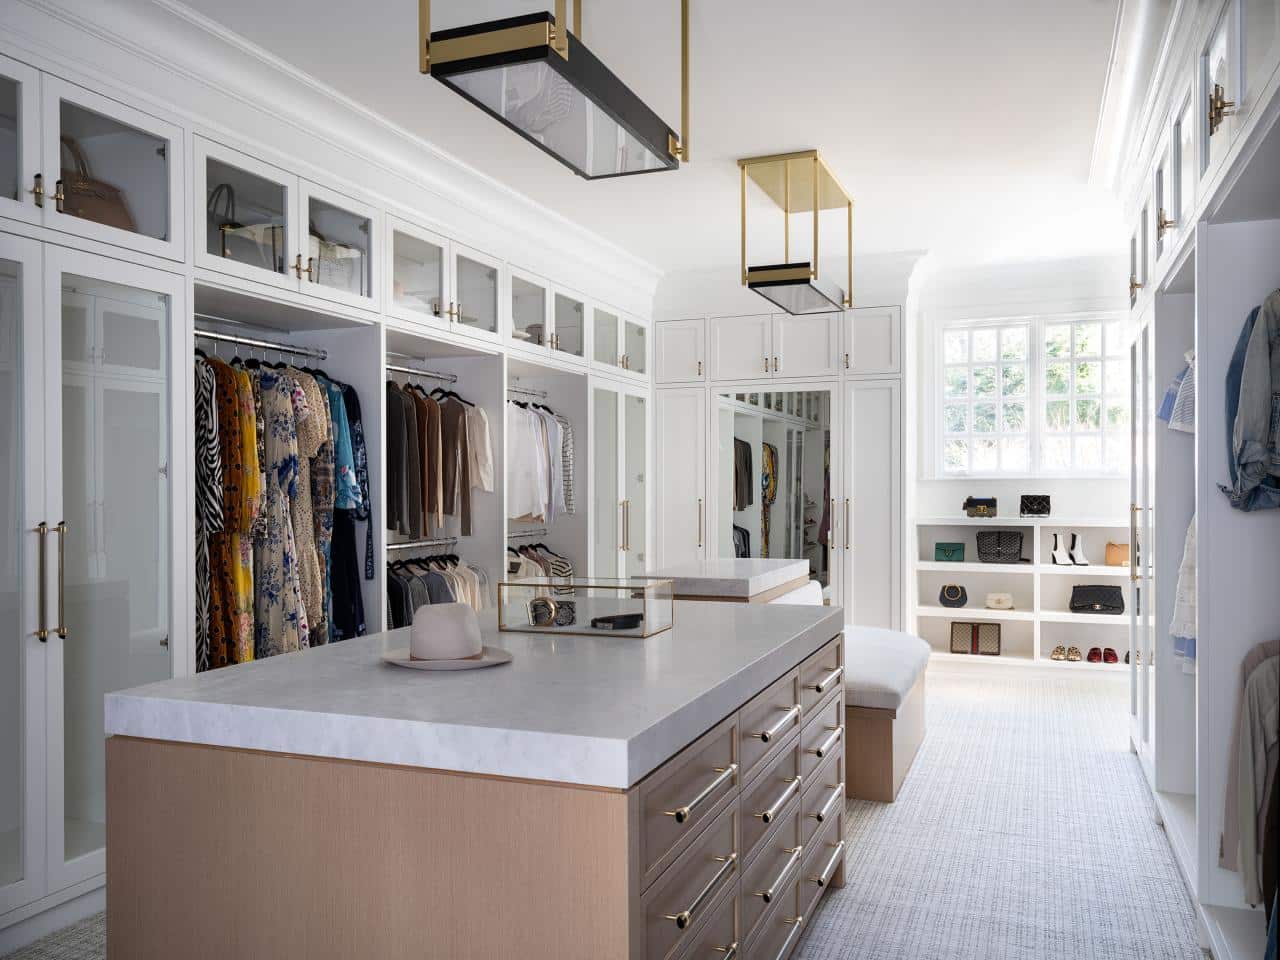 Design Your Dream Walk-In Closet with These Closet Island Ideas